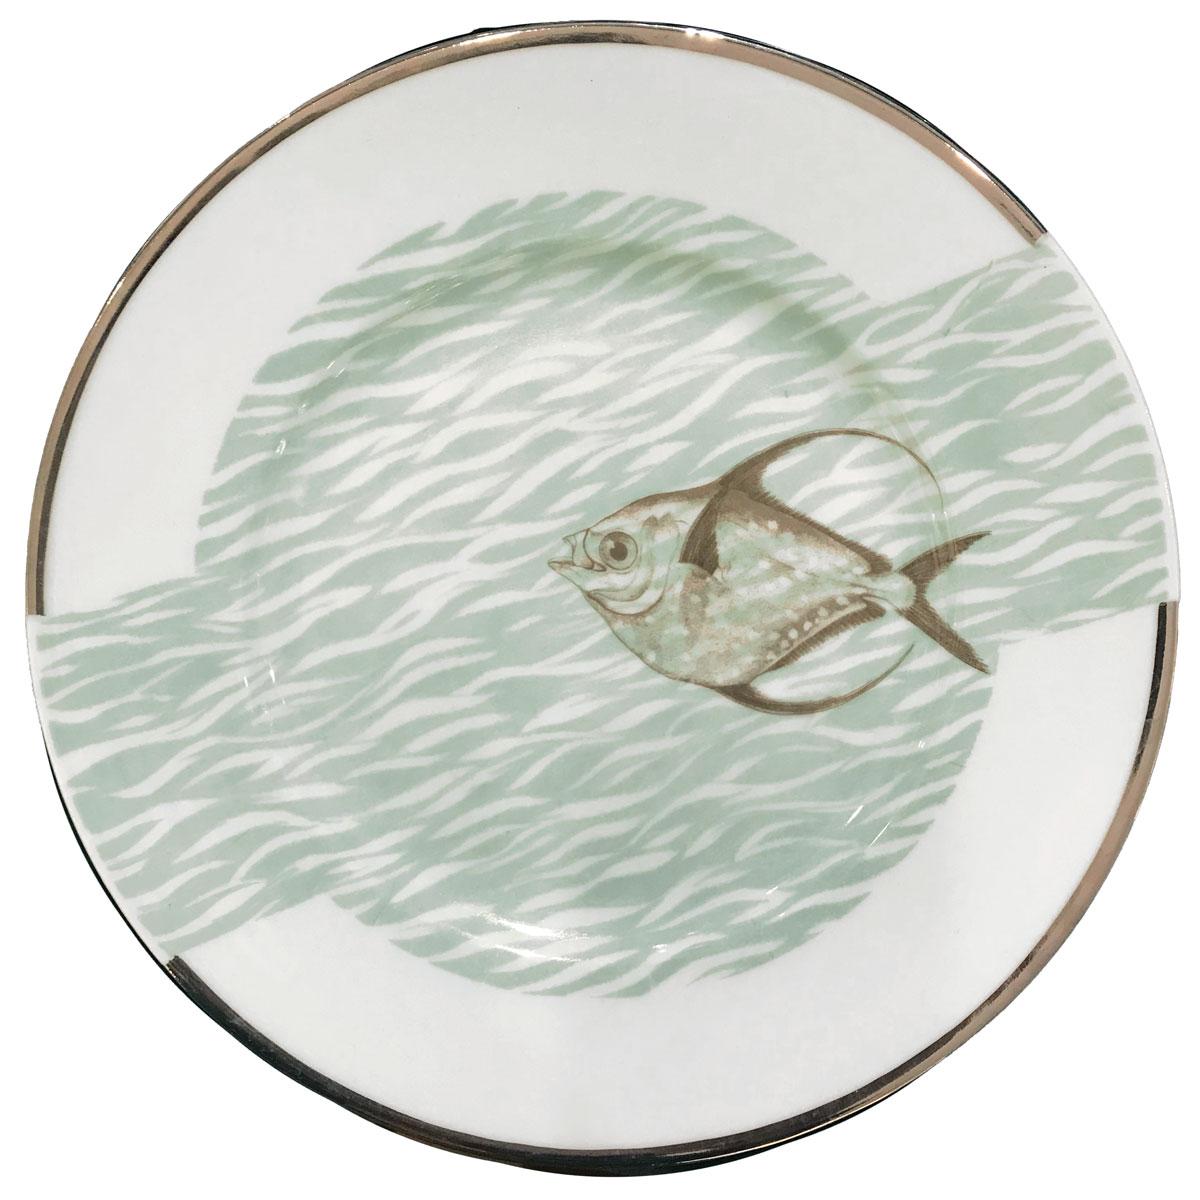 20th Century Art Deco style Fish Service for 12 People by Bernardaud Limoges  c. 1970 For Sale